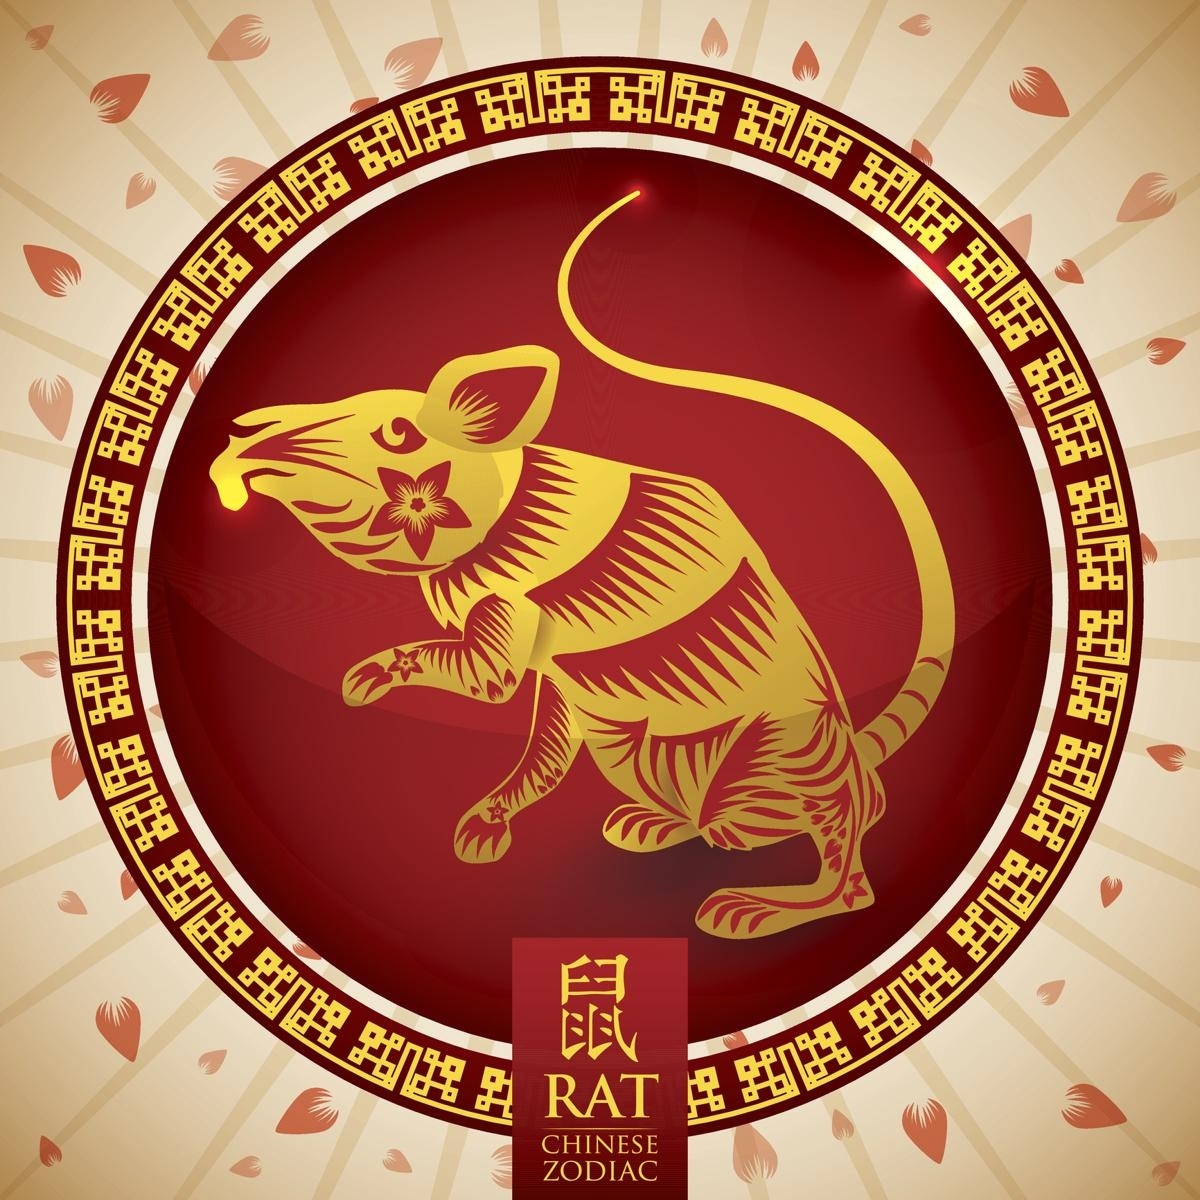 Detailed Information About The Chinese Zodiac Symbols And Impressive Chinese Zodiac Signs And Meanings Years 1900 To Present